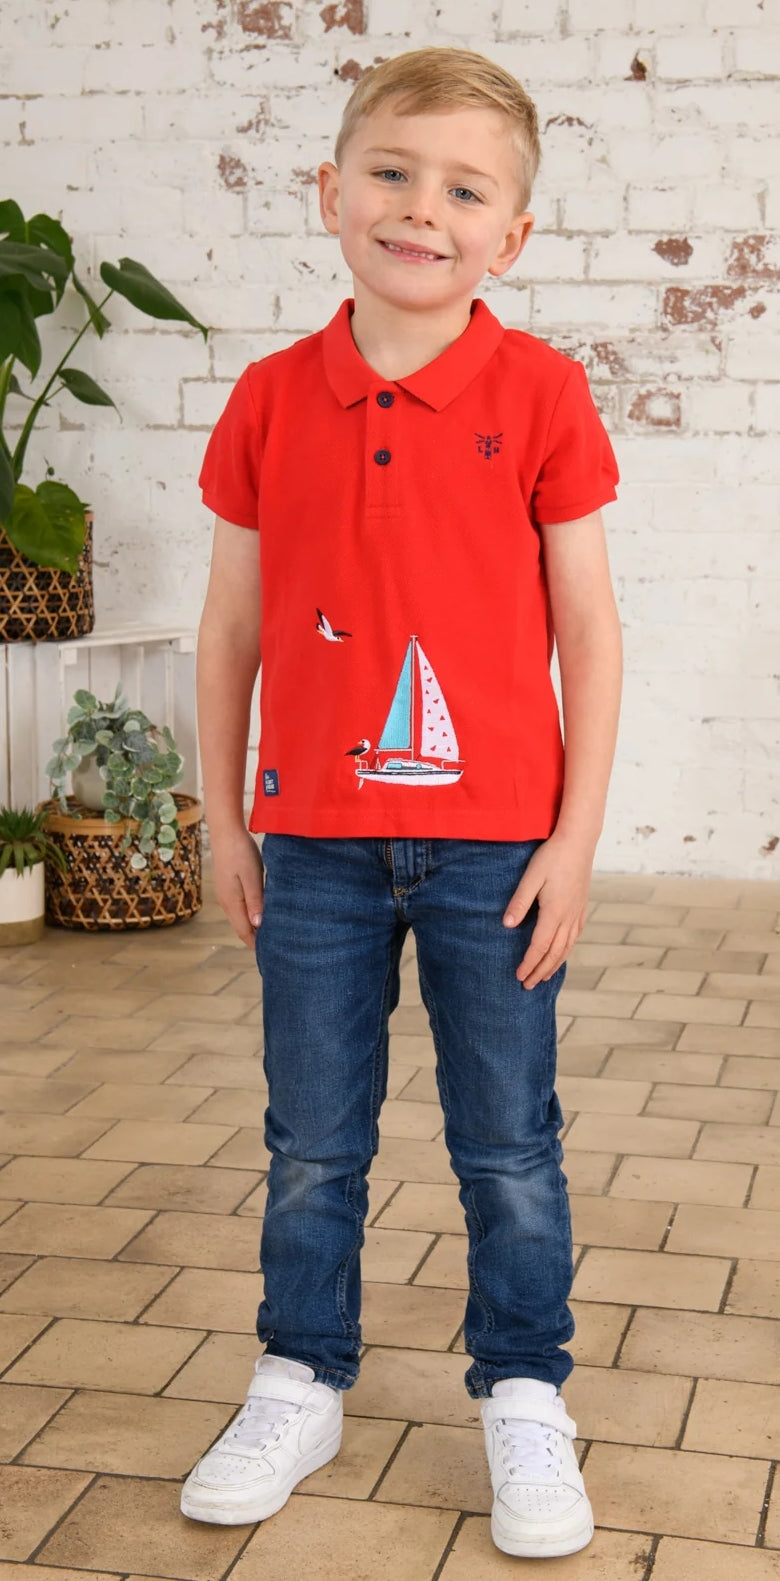 Lighthouse Kids Pier Short Sleeve Pique Polo Shirt - Pillarbox Red / Boat